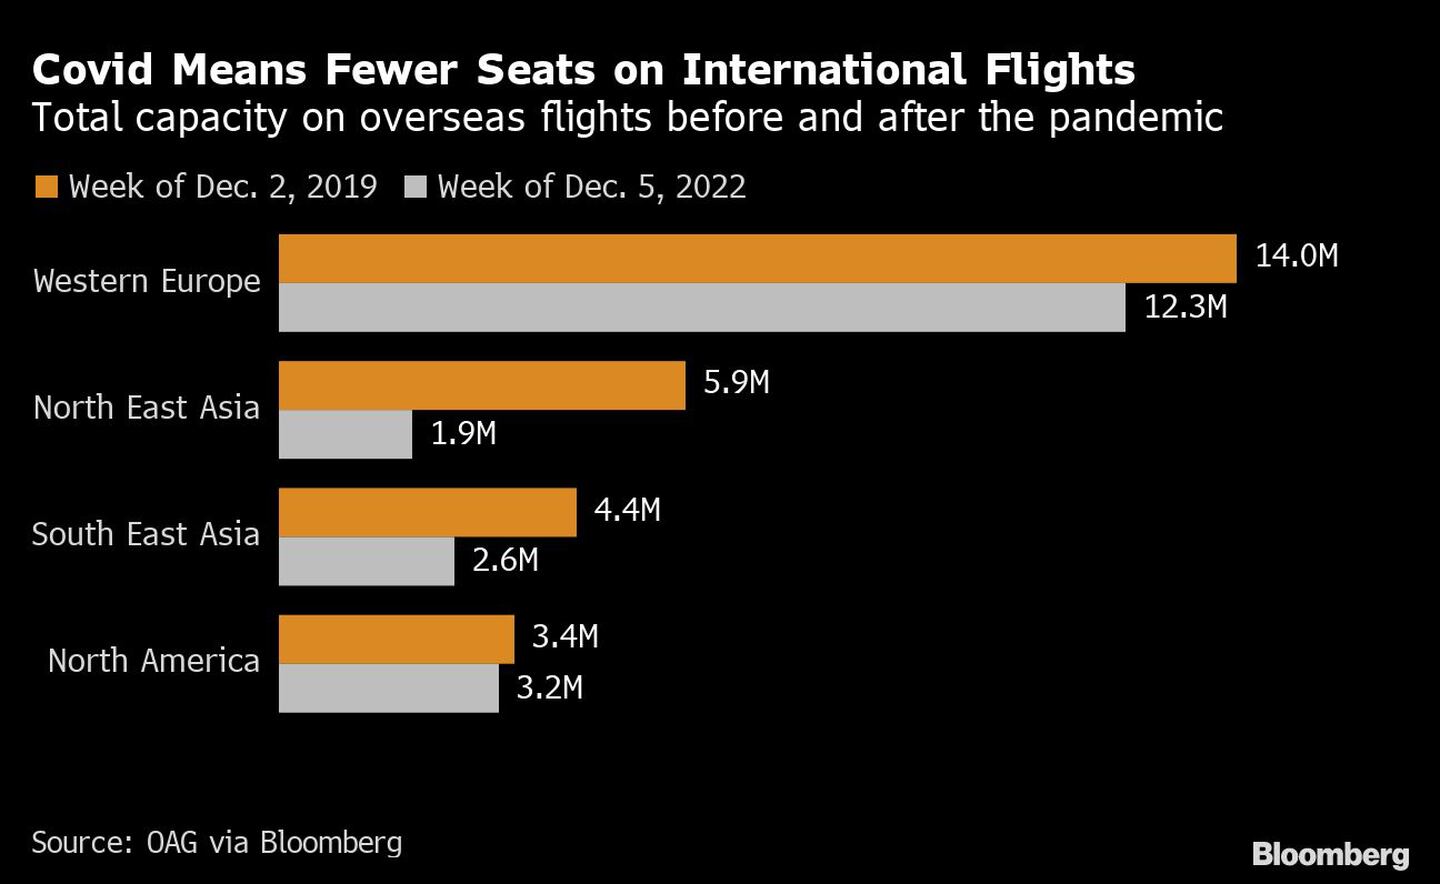 Covid Means Fewer Seats on International Flights  | Total capacity on overseas flights before and after the pandemicdfd